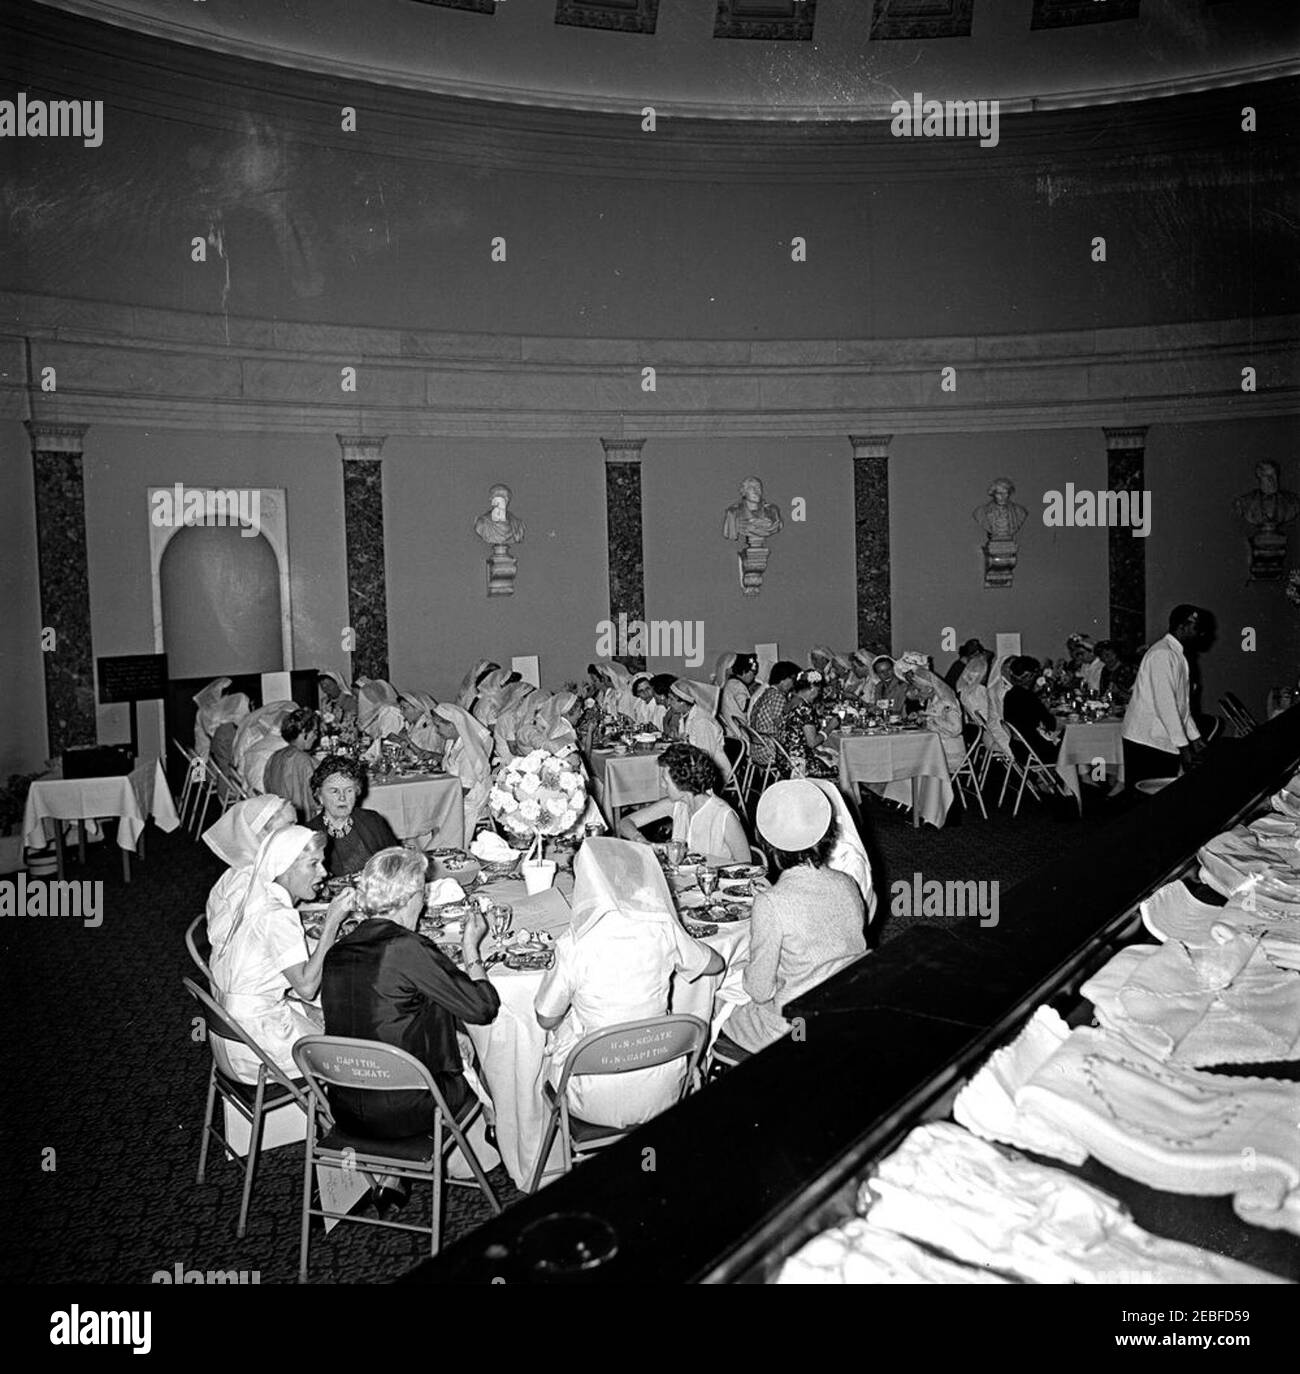 First Lady Jacqueline Kennedy (JBK) attends the Senate Ladies Red Cross Unit Luncheon. First Lady Jacqueline Kennedy (back to camera, wearing hat), Lady Bird Johnson, and members of the Senate Ladies Red Cross Unit attend a luncheon in the Old Supreme Court Chamber, United States Capitol Building, Washington, D.C. The Red Cross unit (also known as u201cLadies of the Senateu201d) is comprised of the wives of members of the US Senate. Stock Photo